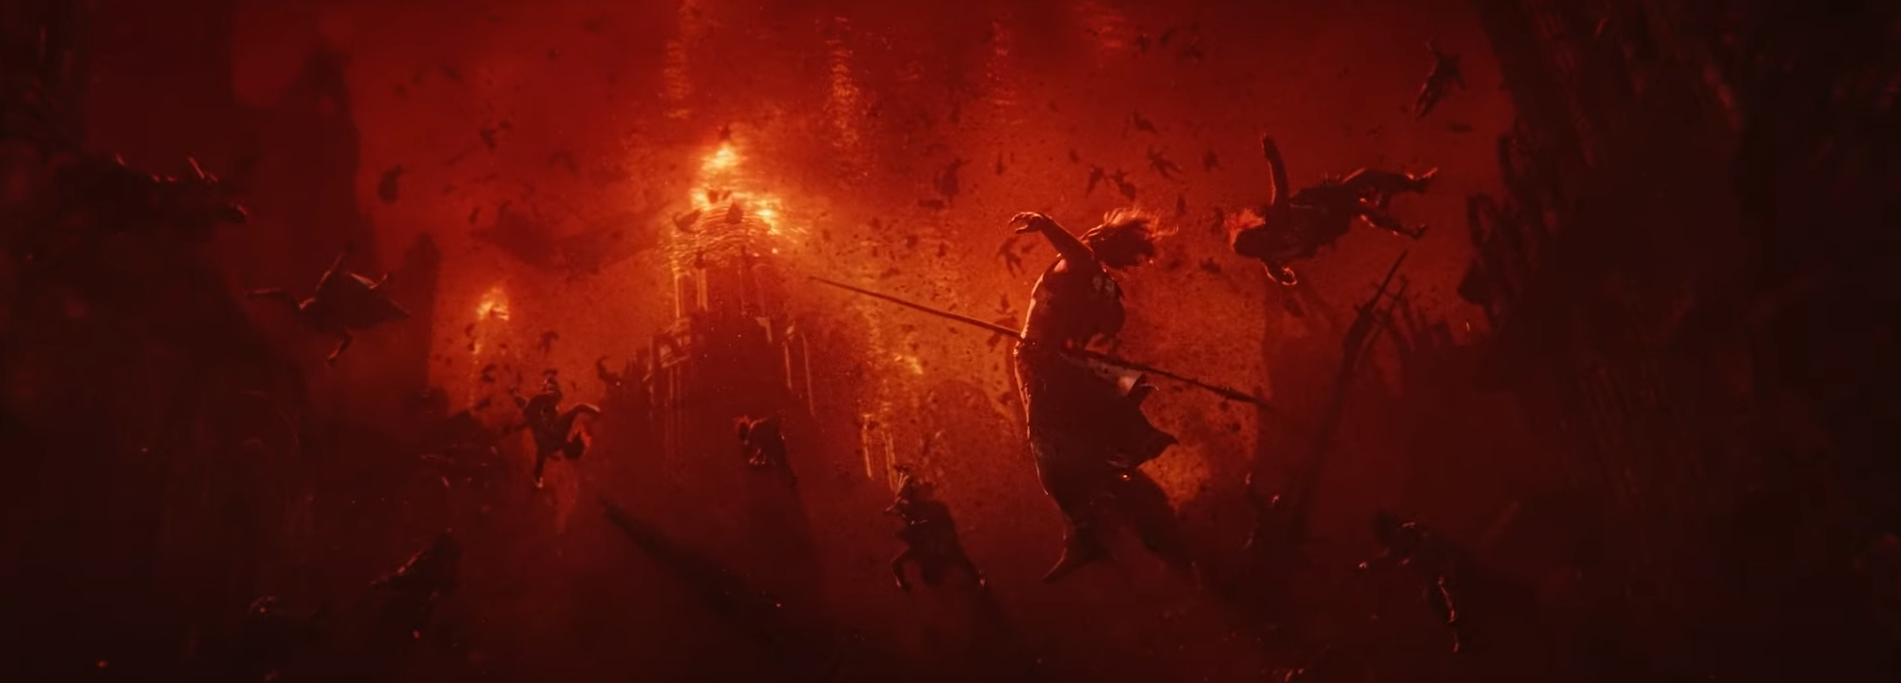 The Lord of the Rings The Rings of Power: Trailer, Release Date